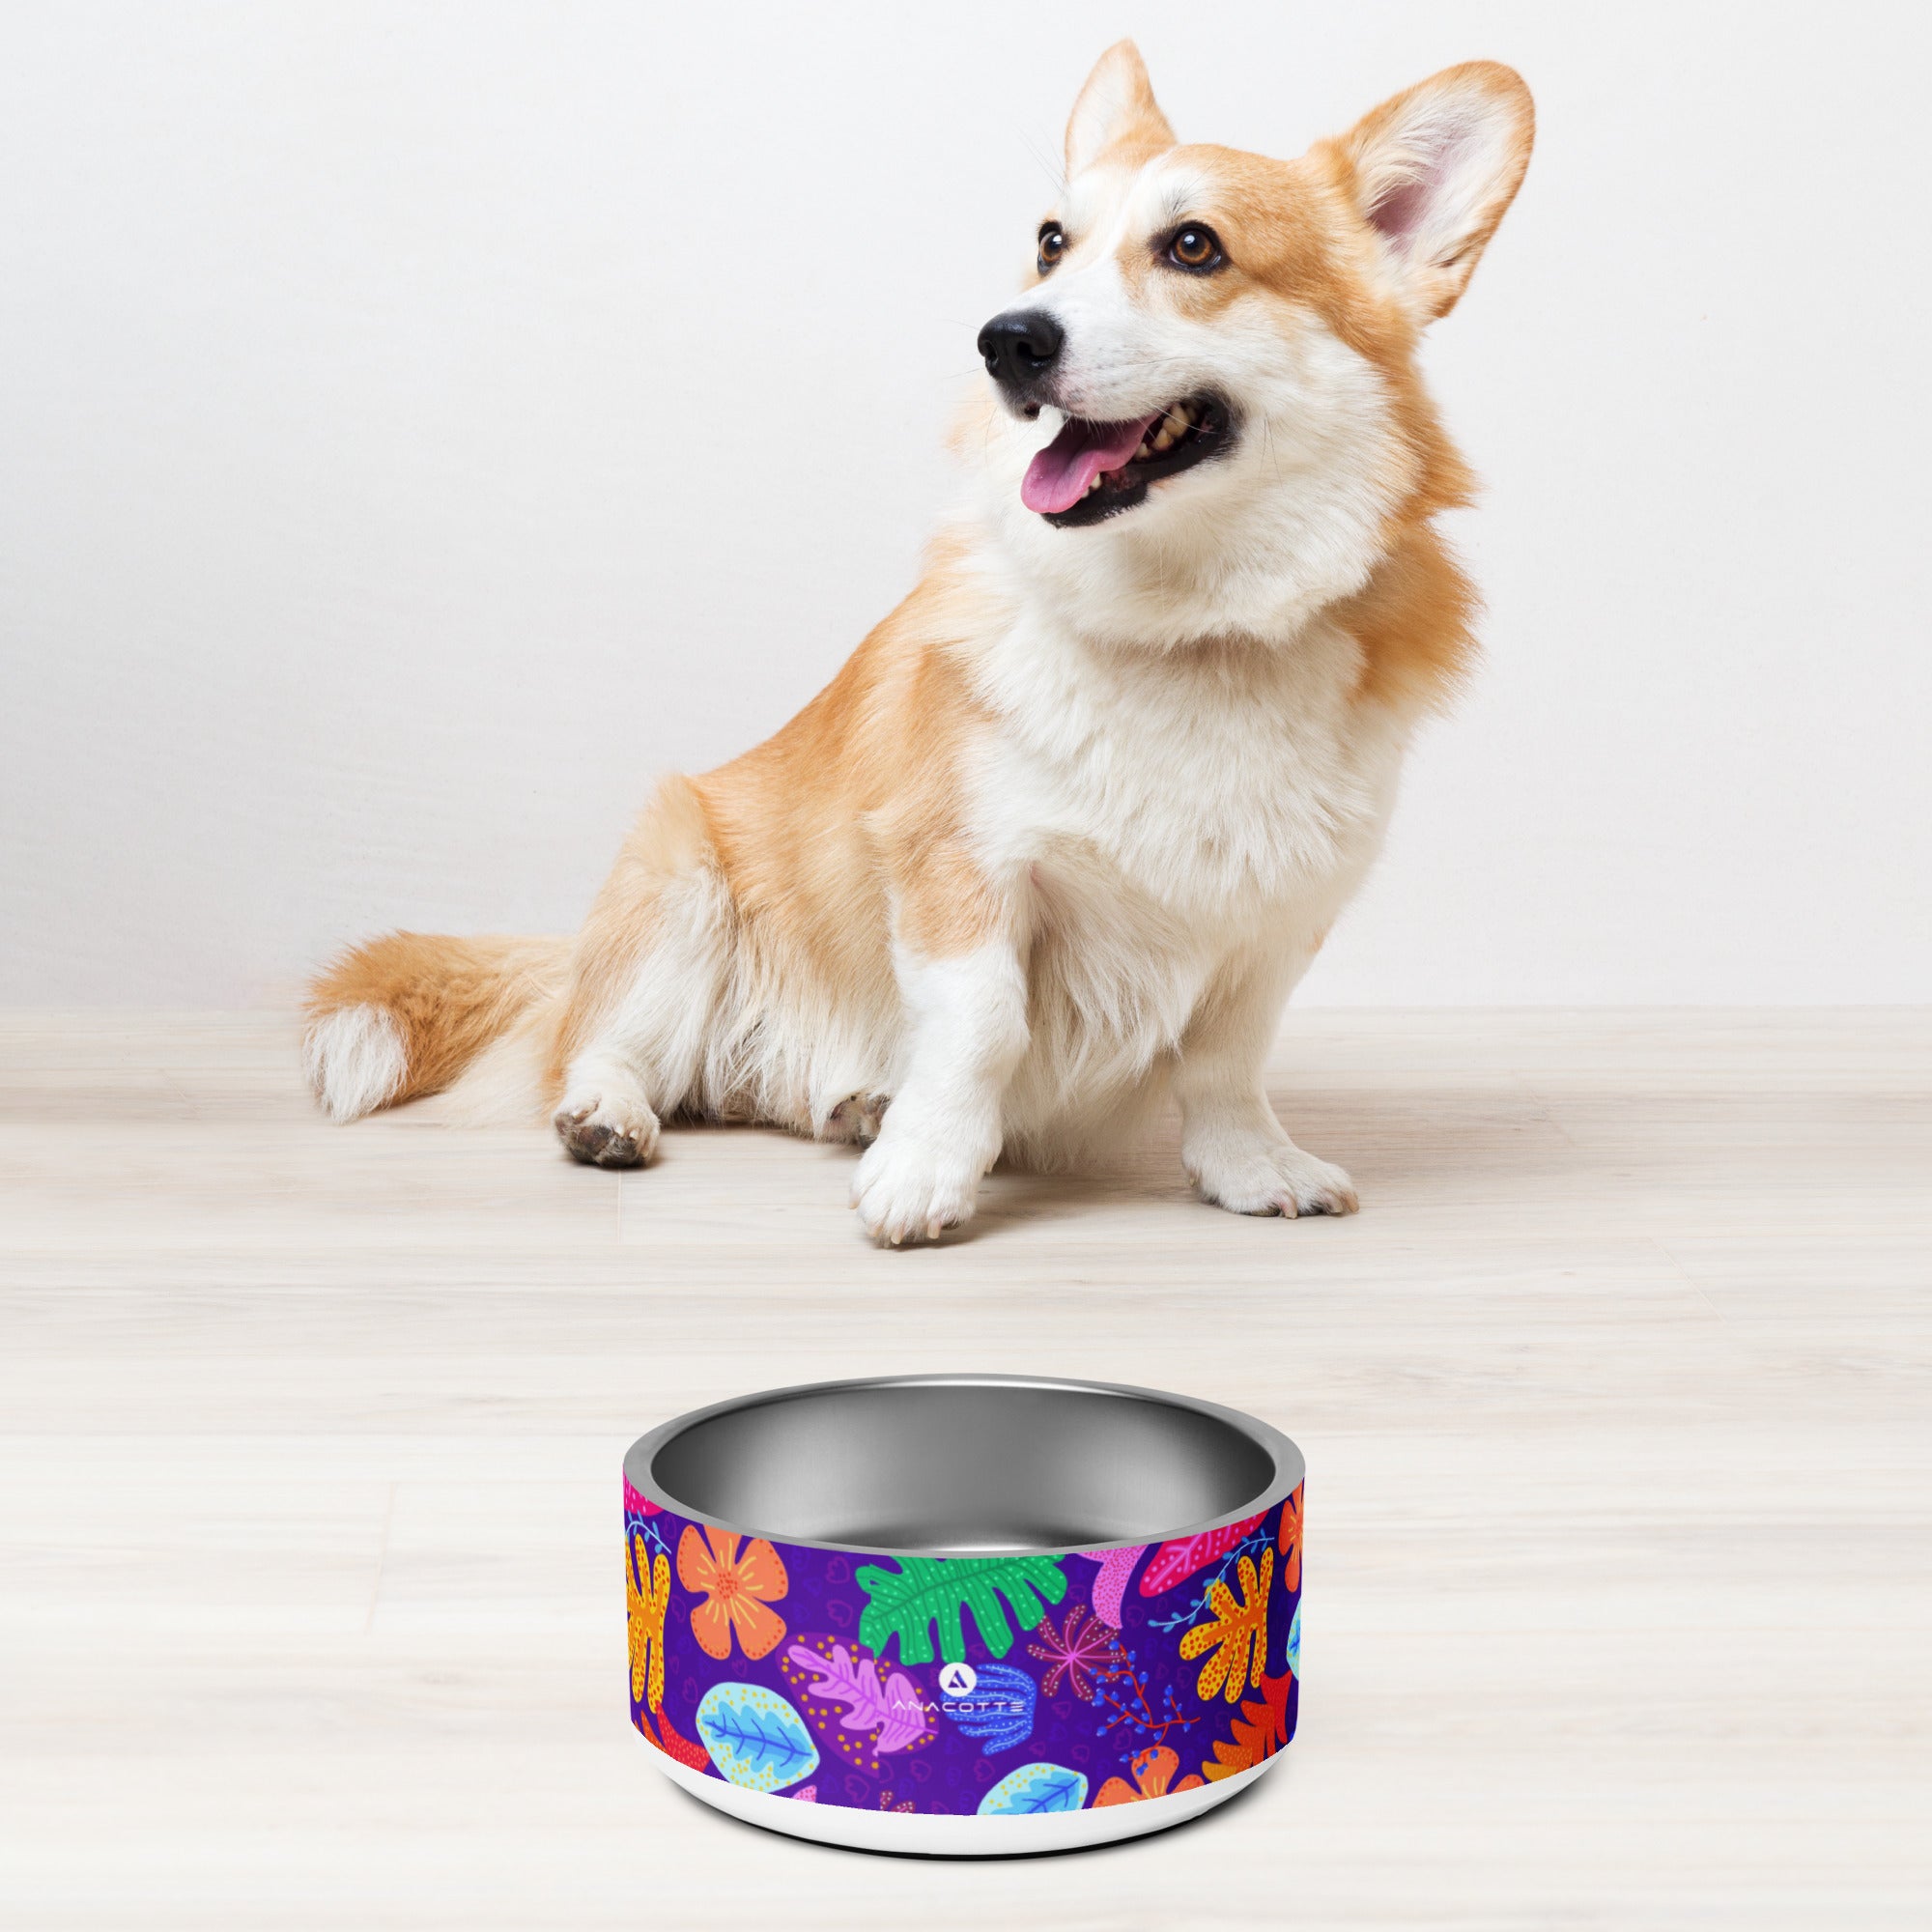 Anacotte Pet Bowl: Made with BPA-Free, Food-Grade Stainless Steel